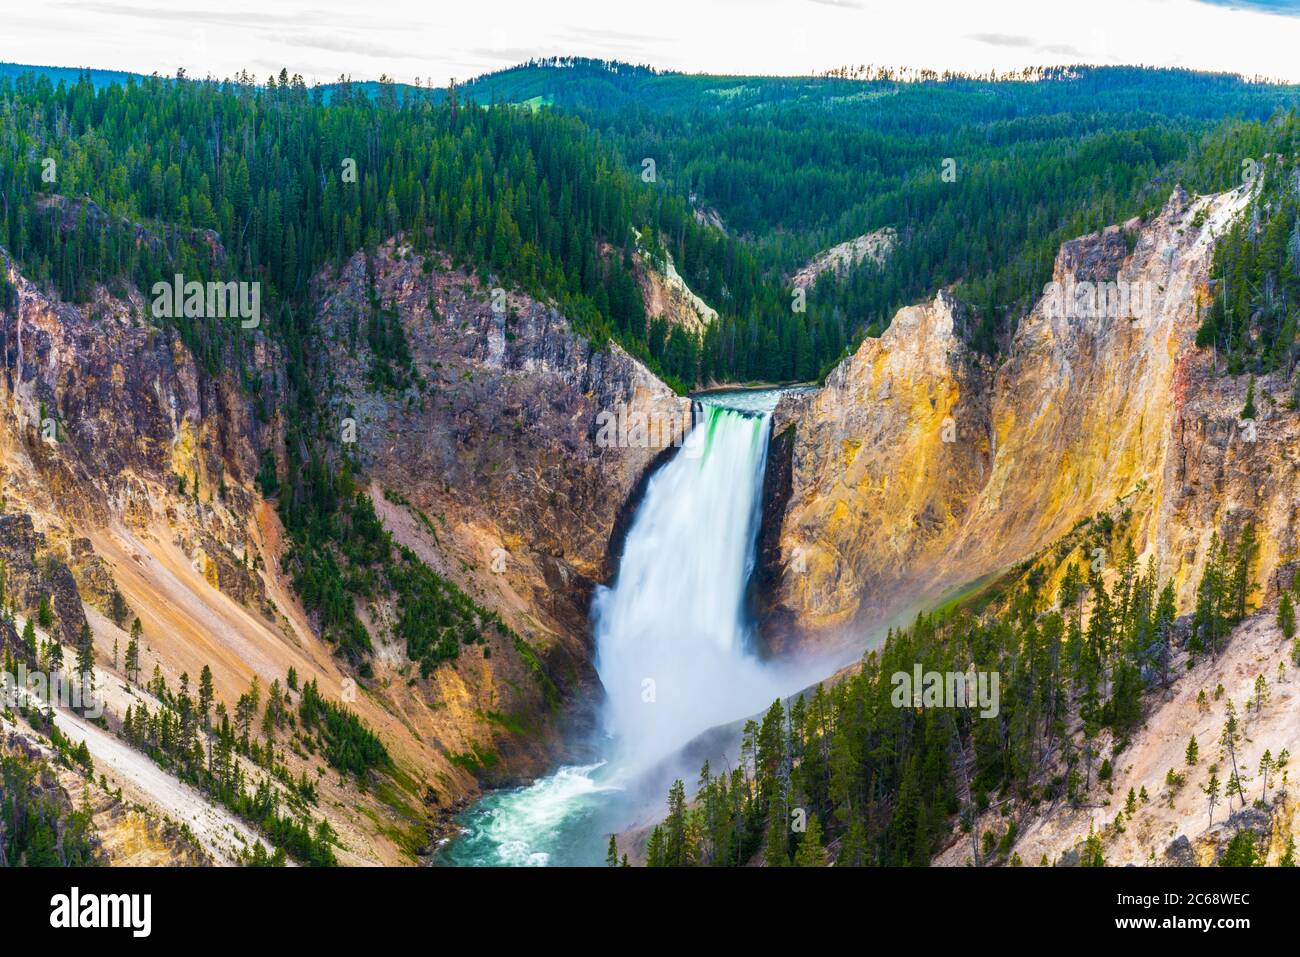 The lower fall in Yellowstone National Park, Wyoming, USA. Stock Photo